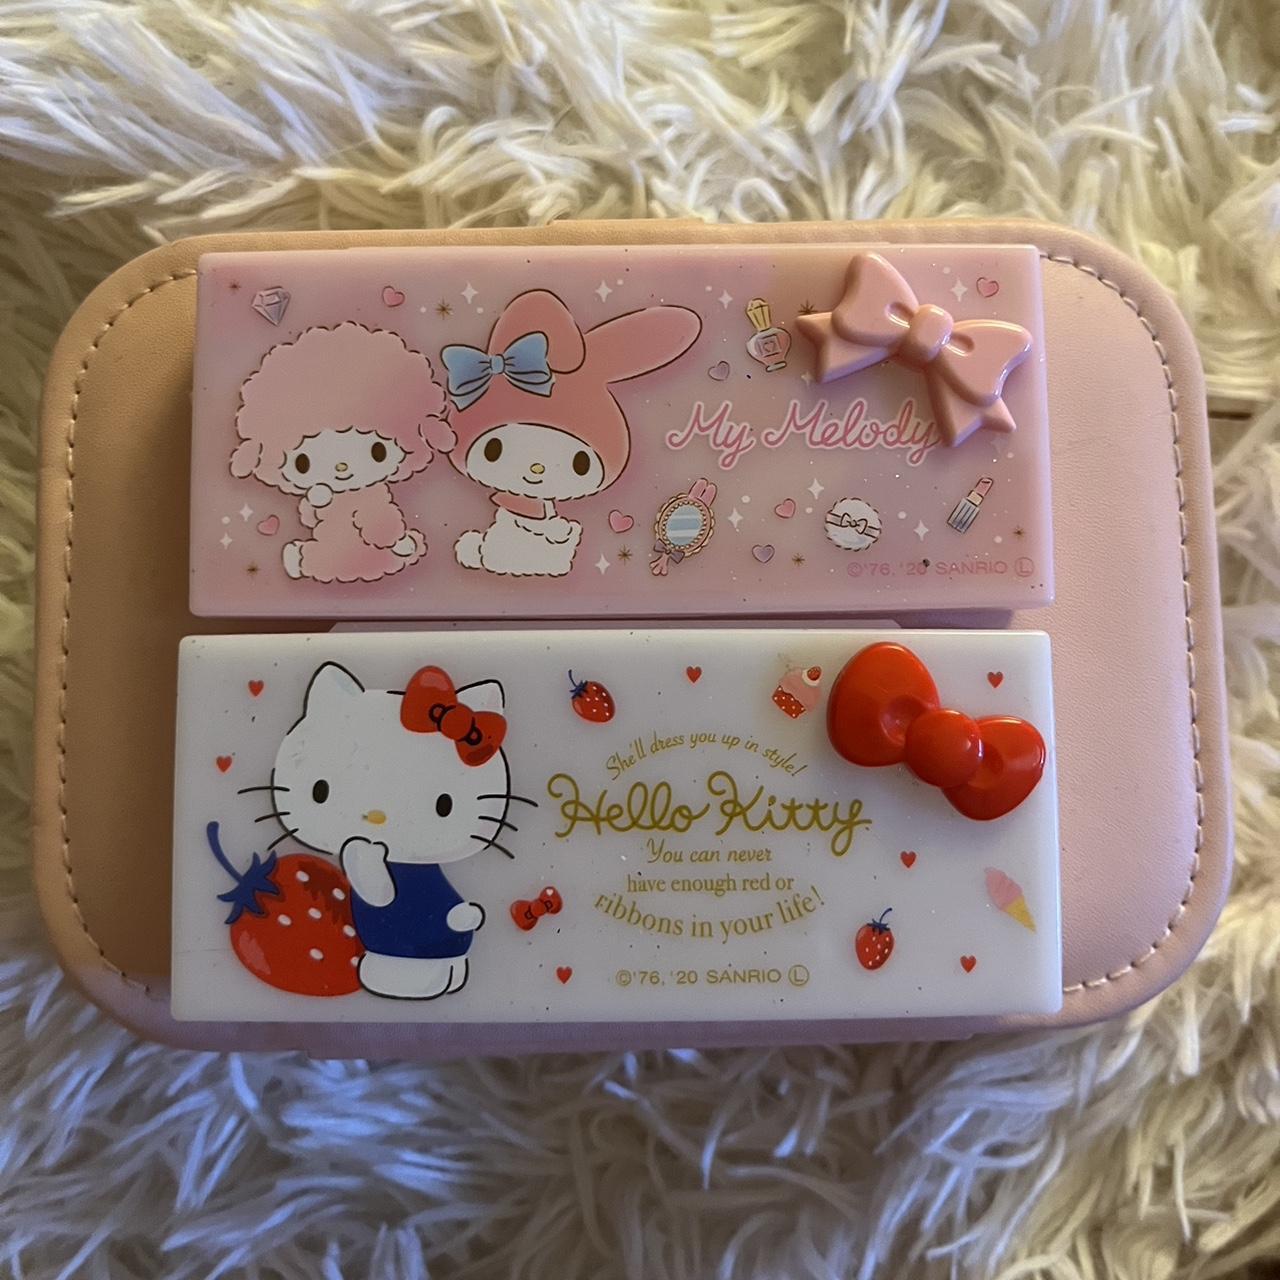 Hello kitty/ my melody sparkly cases $25 both $11 - Depop